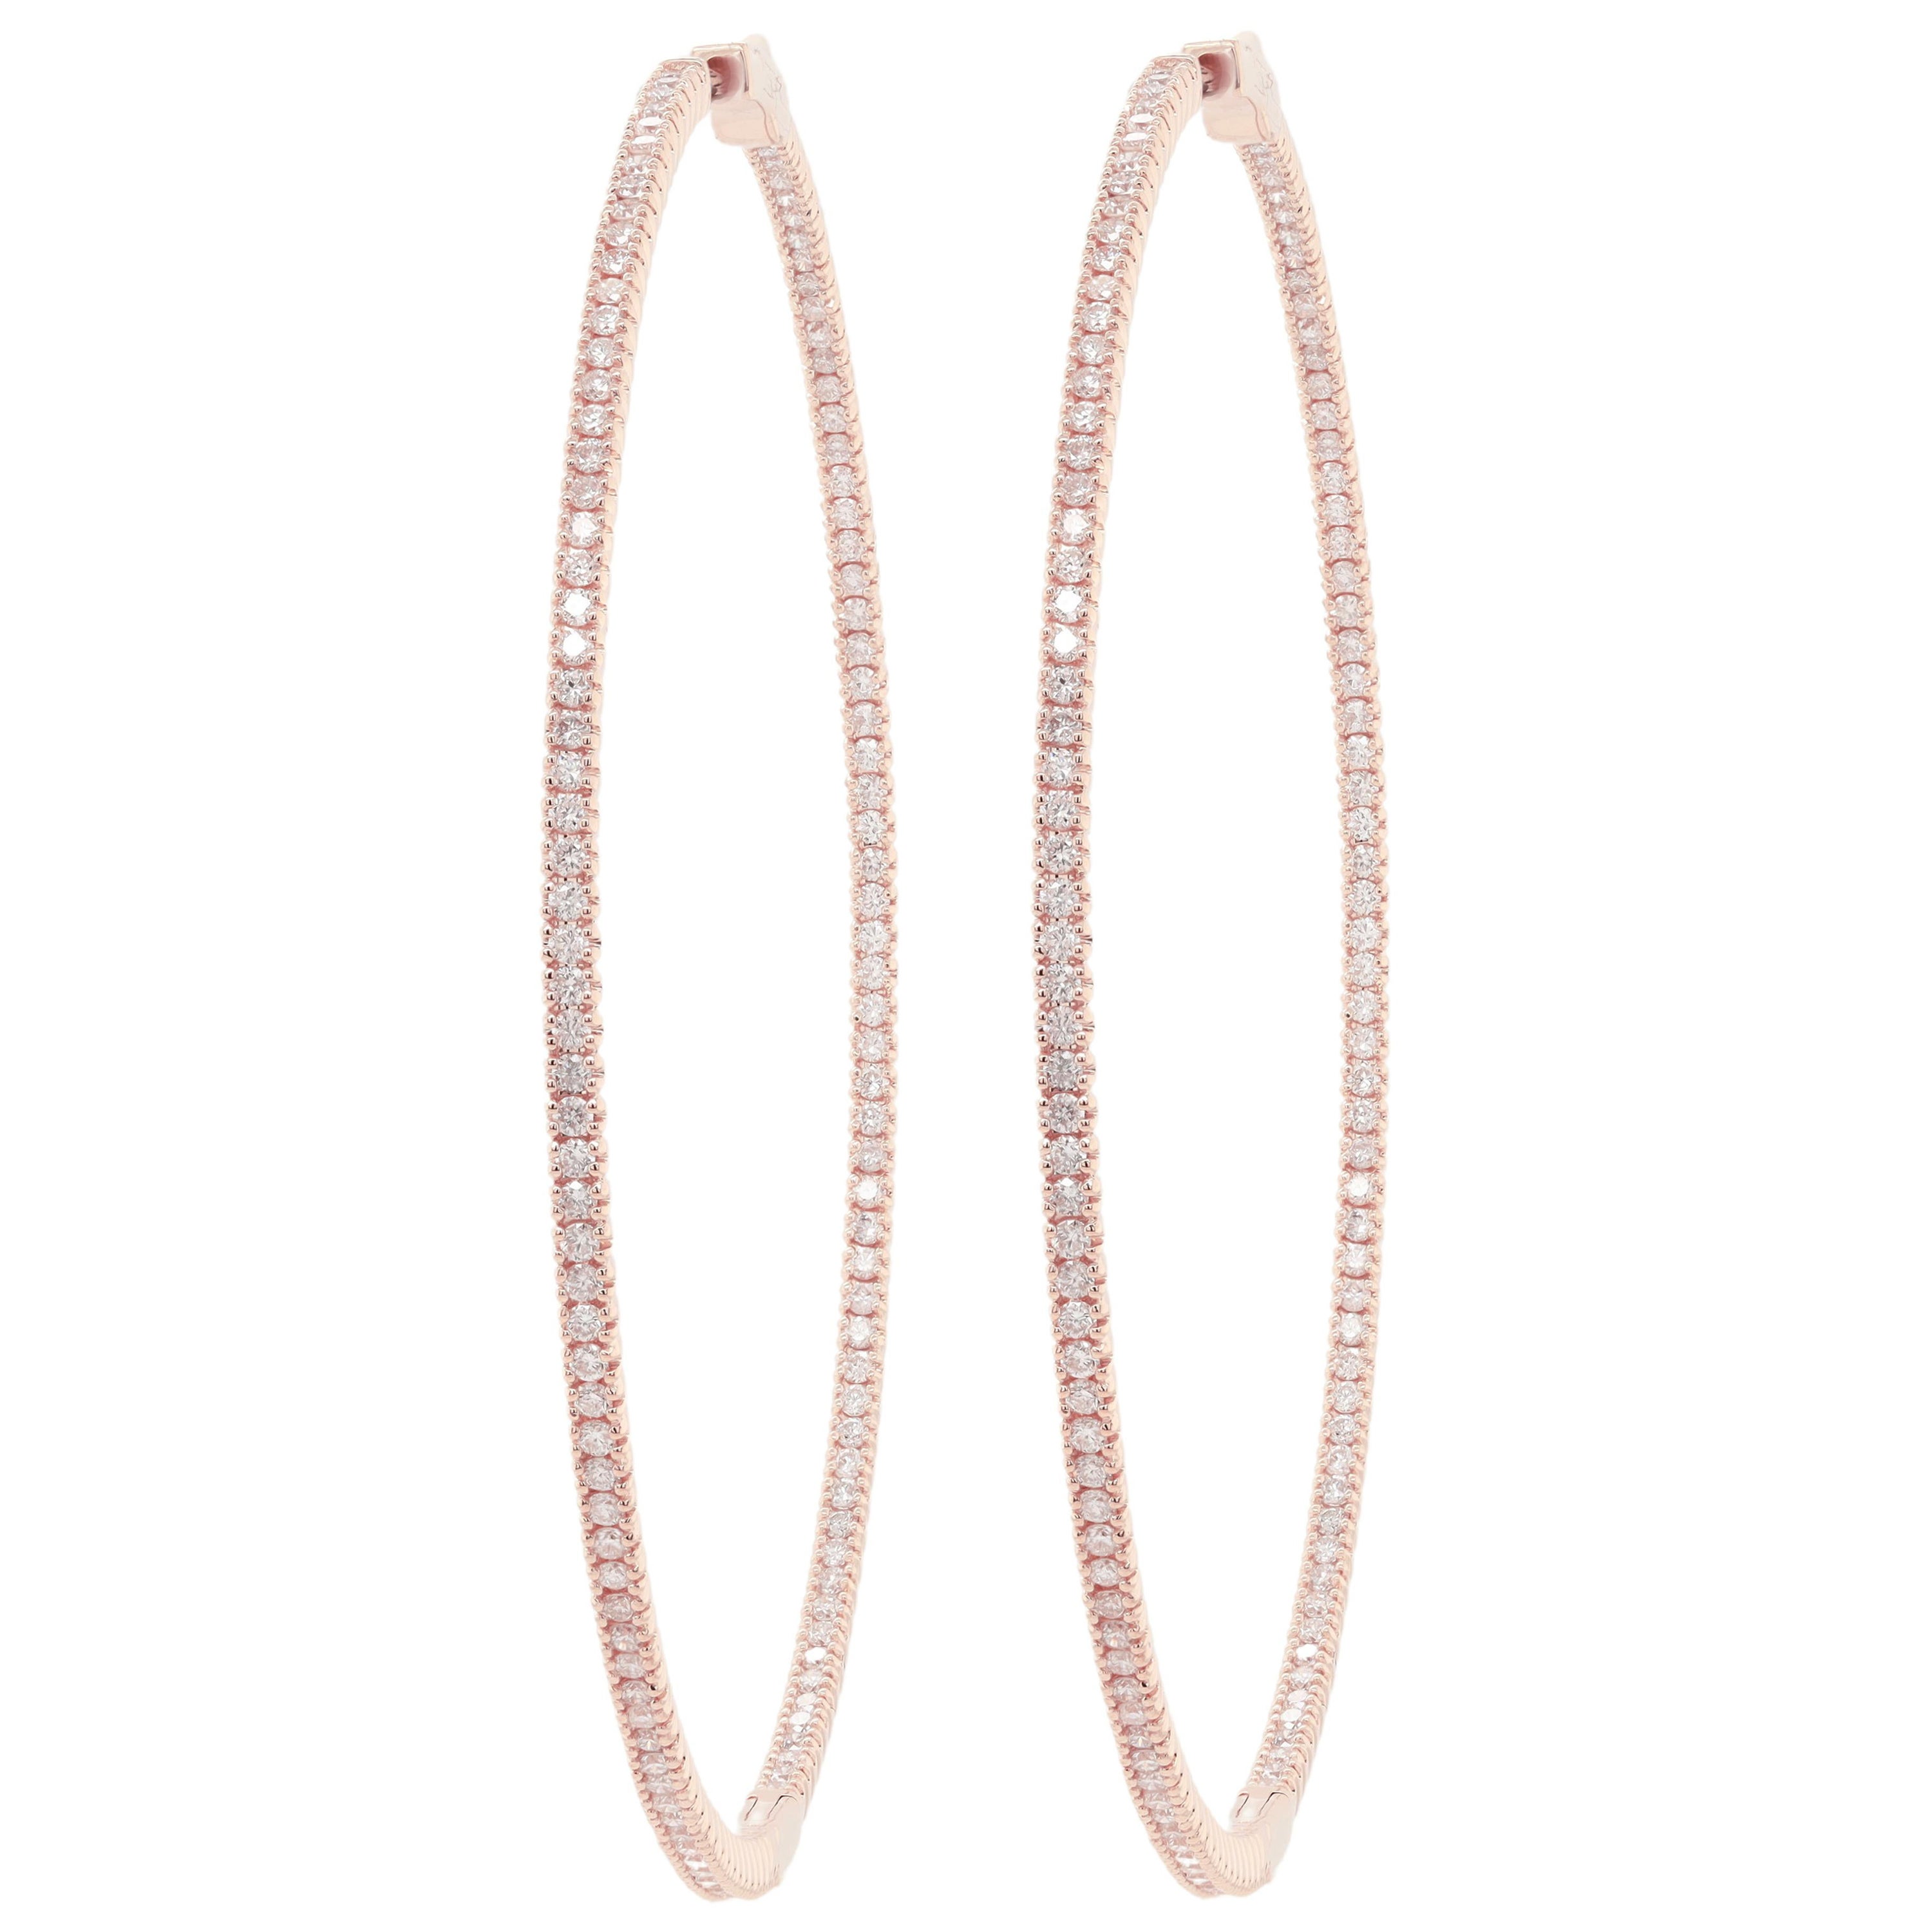 Diana M. 14kt rose gold, 1.75" hoop earrings featuring 1.30 cts round diamond For Sale